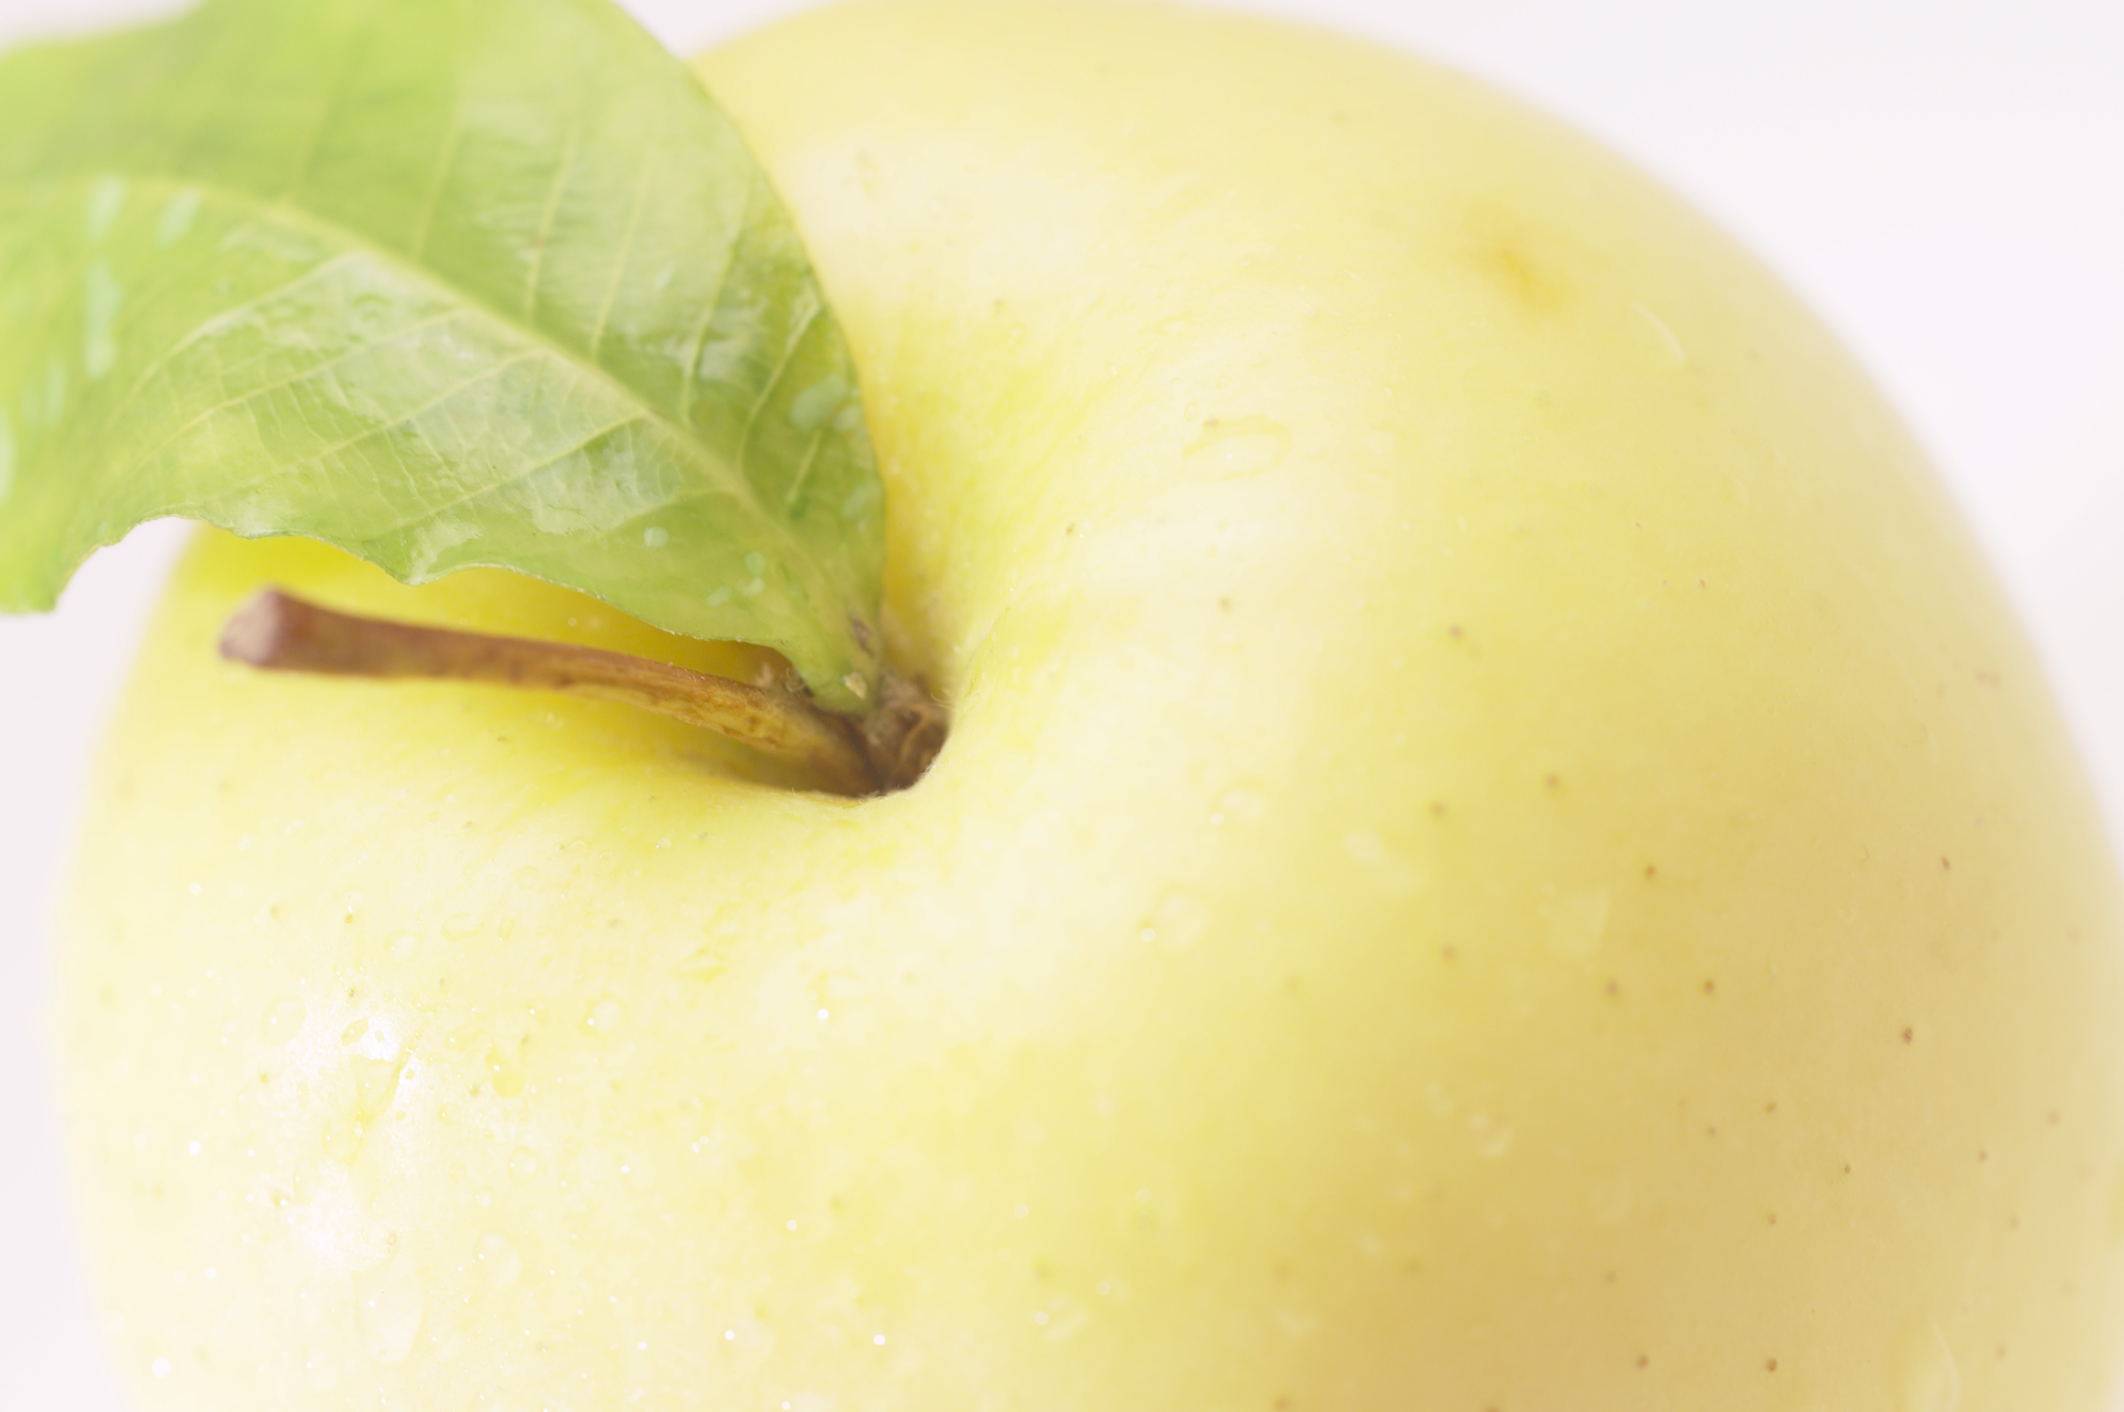 Apple - Granny Smith - tasting notes, identification, reviews